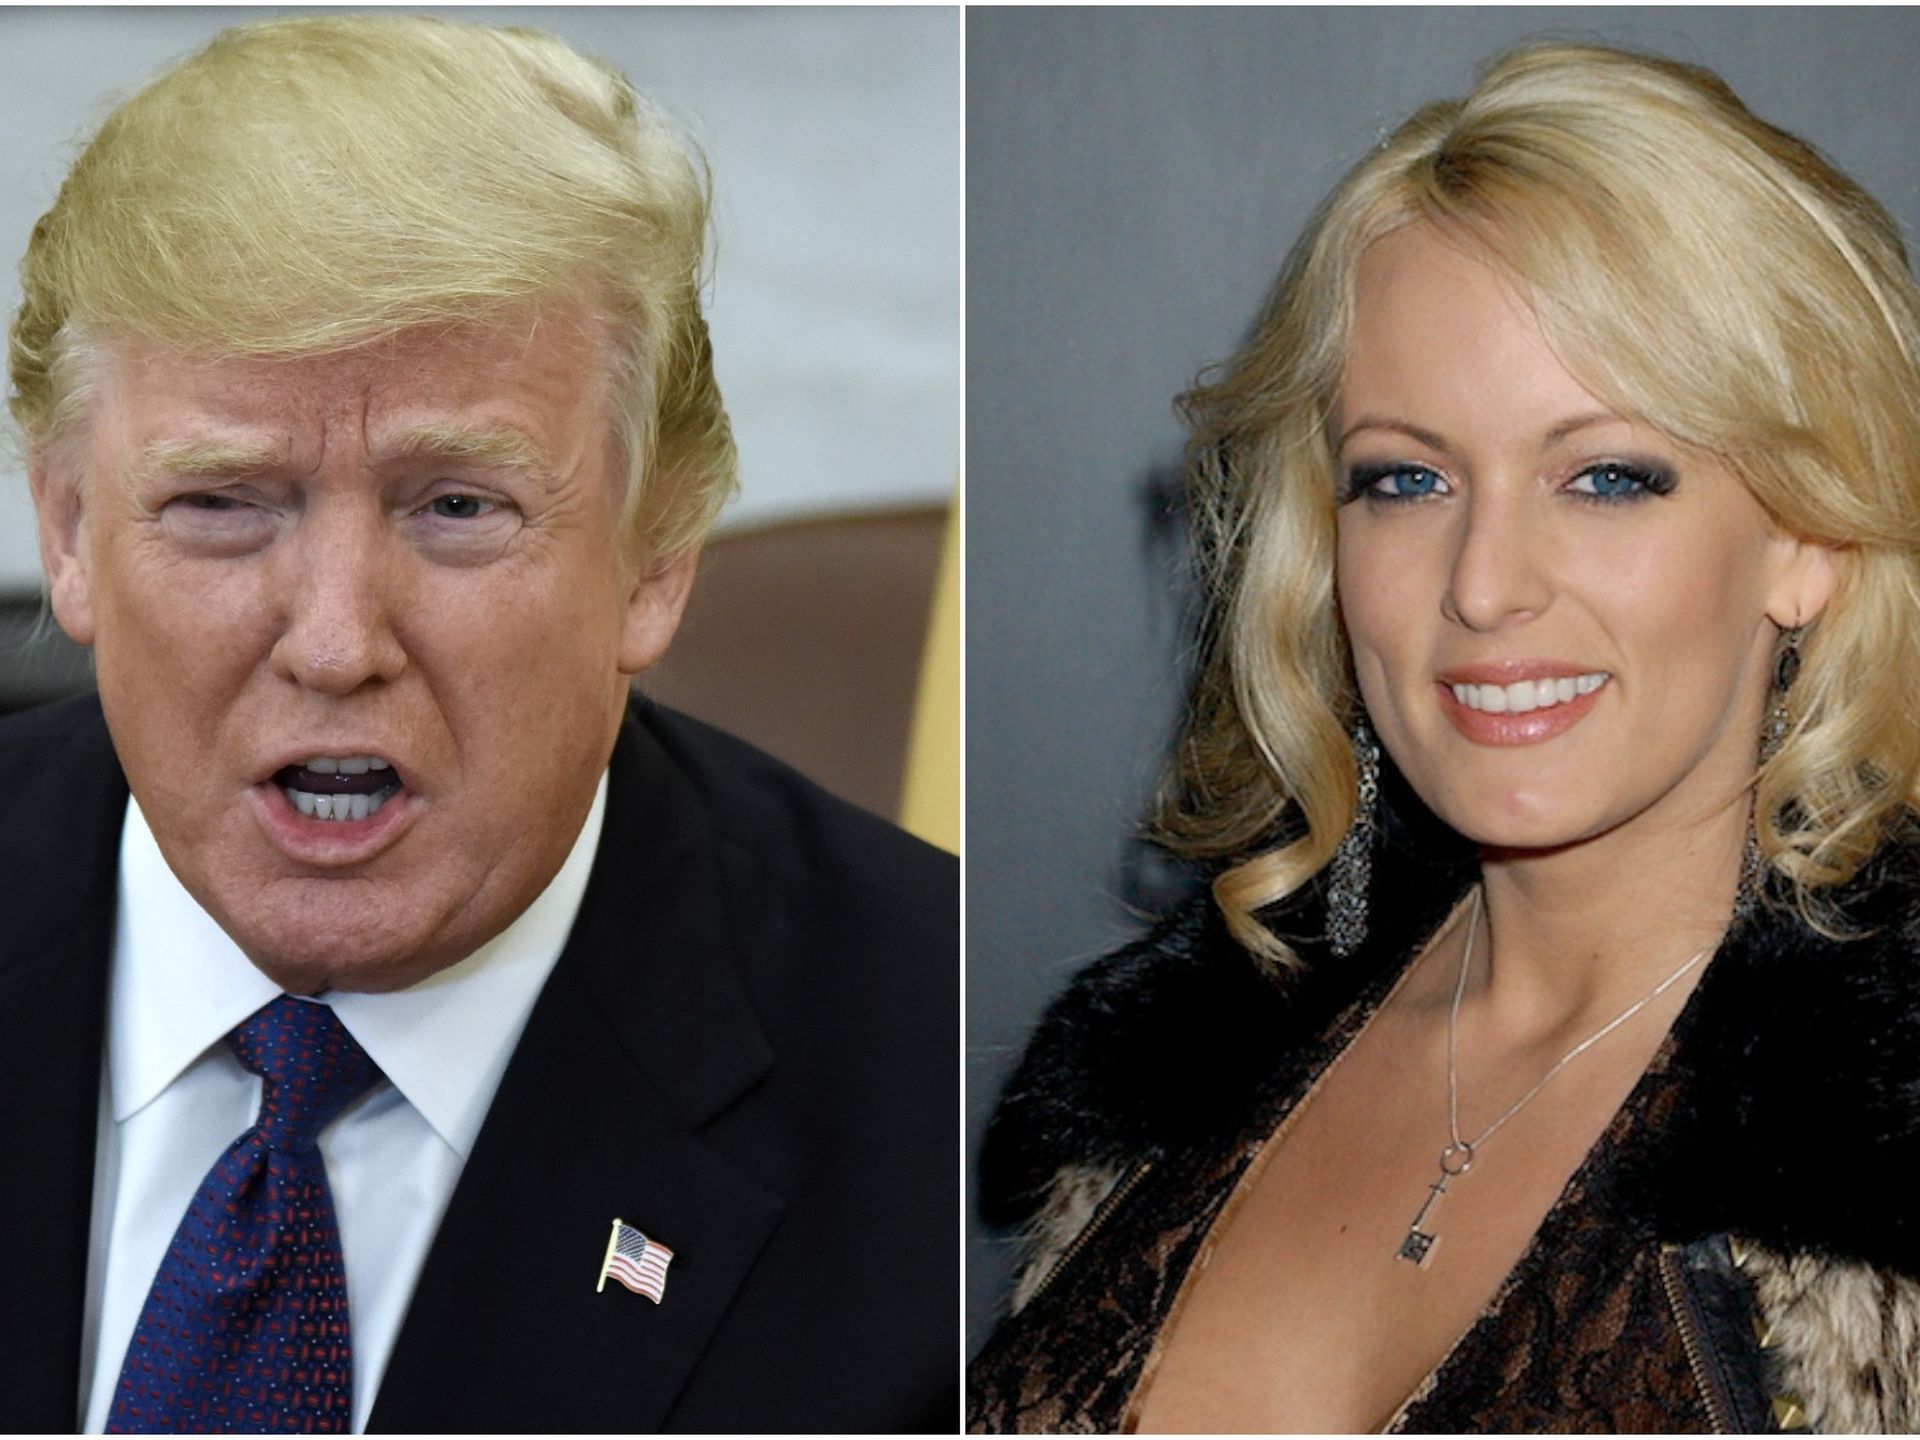 1920px x 1440px - Report: Fox News declined to publish Trump/porn star story before election